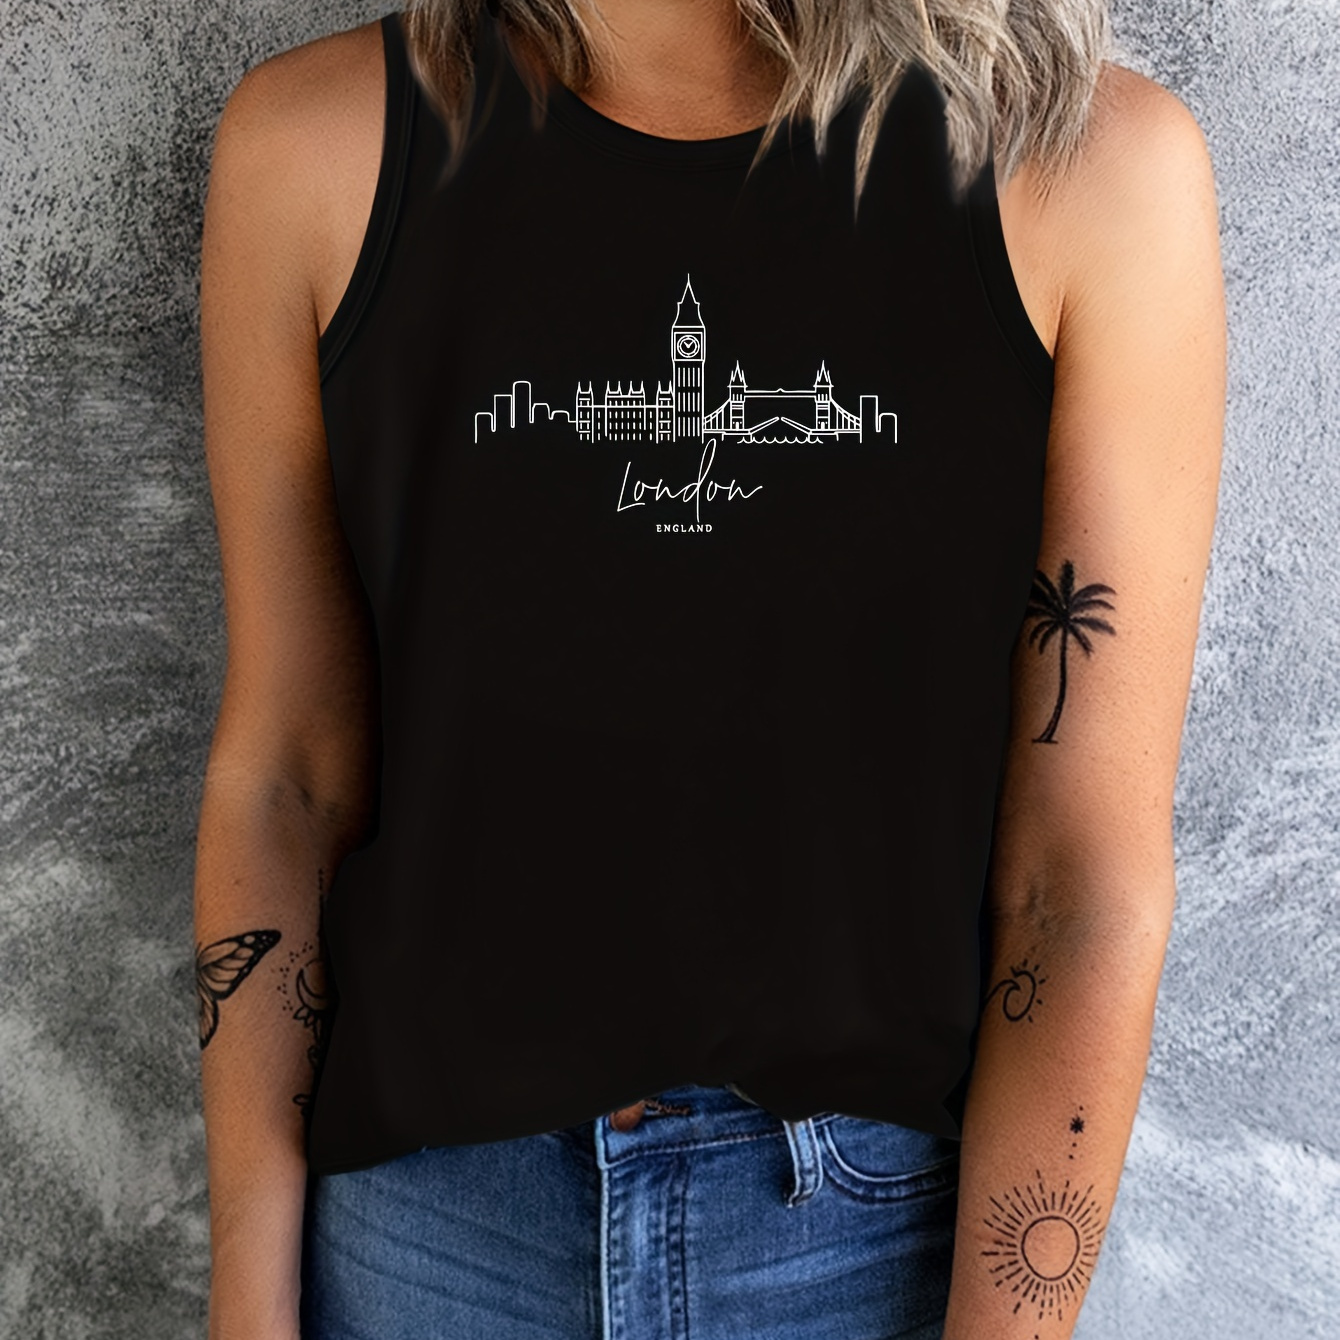 

London Building Print Tank Top, Casual Crew Neck Sleeveless Tank Top For Summer, Women's Clothing